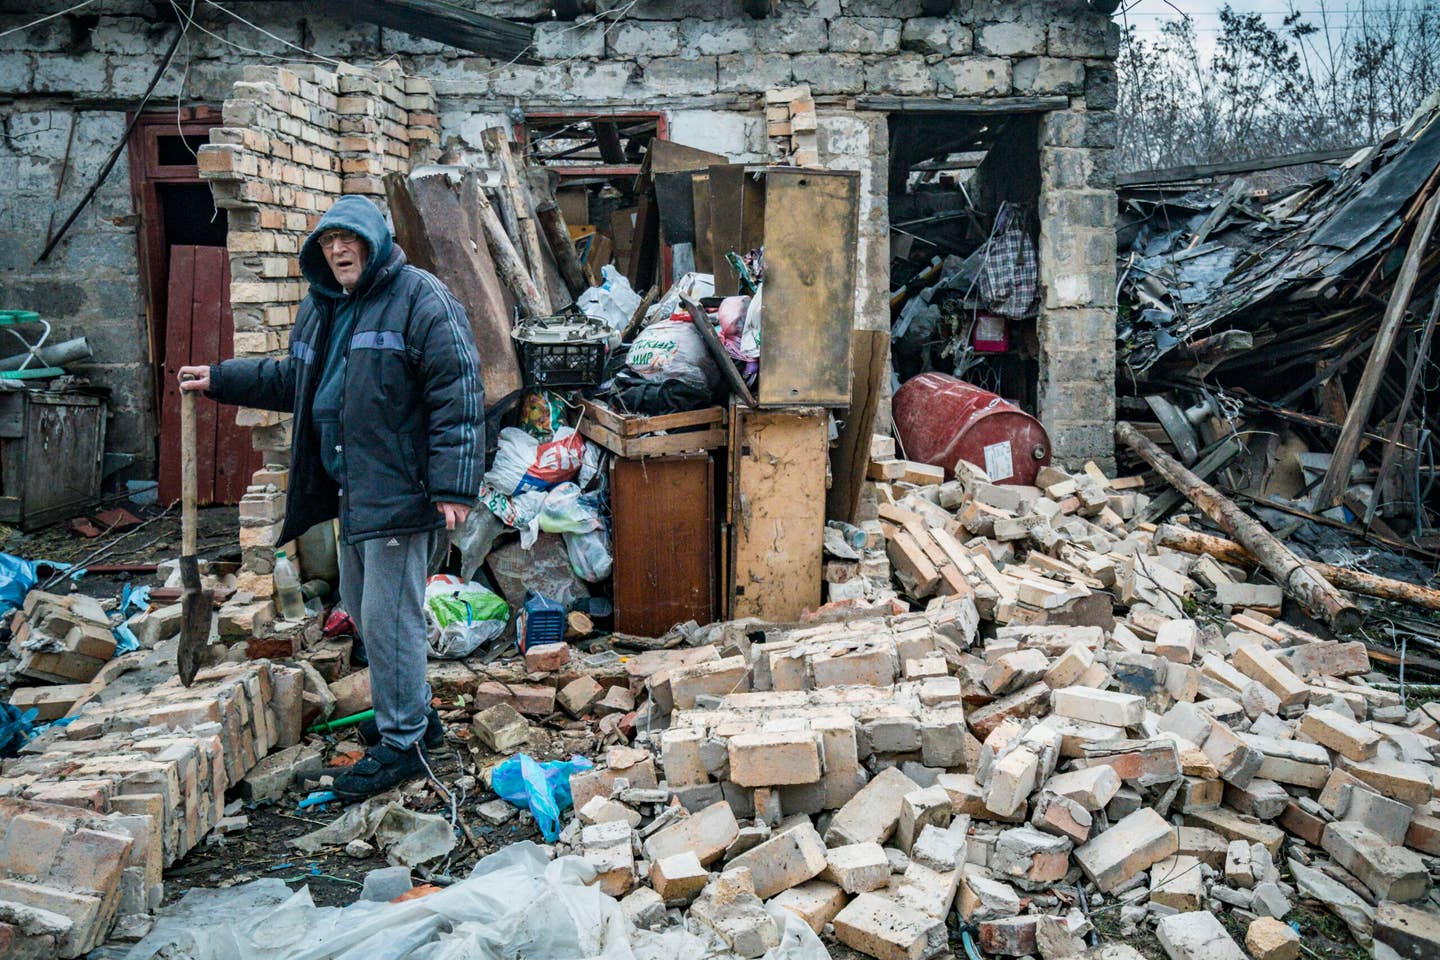 A man tries to recover after his home was destroyed by Russian shelling in Kostiantynivka, a village in the Donbas region. (Photo by Celestino Arce/NurPhoto via Getty Images)